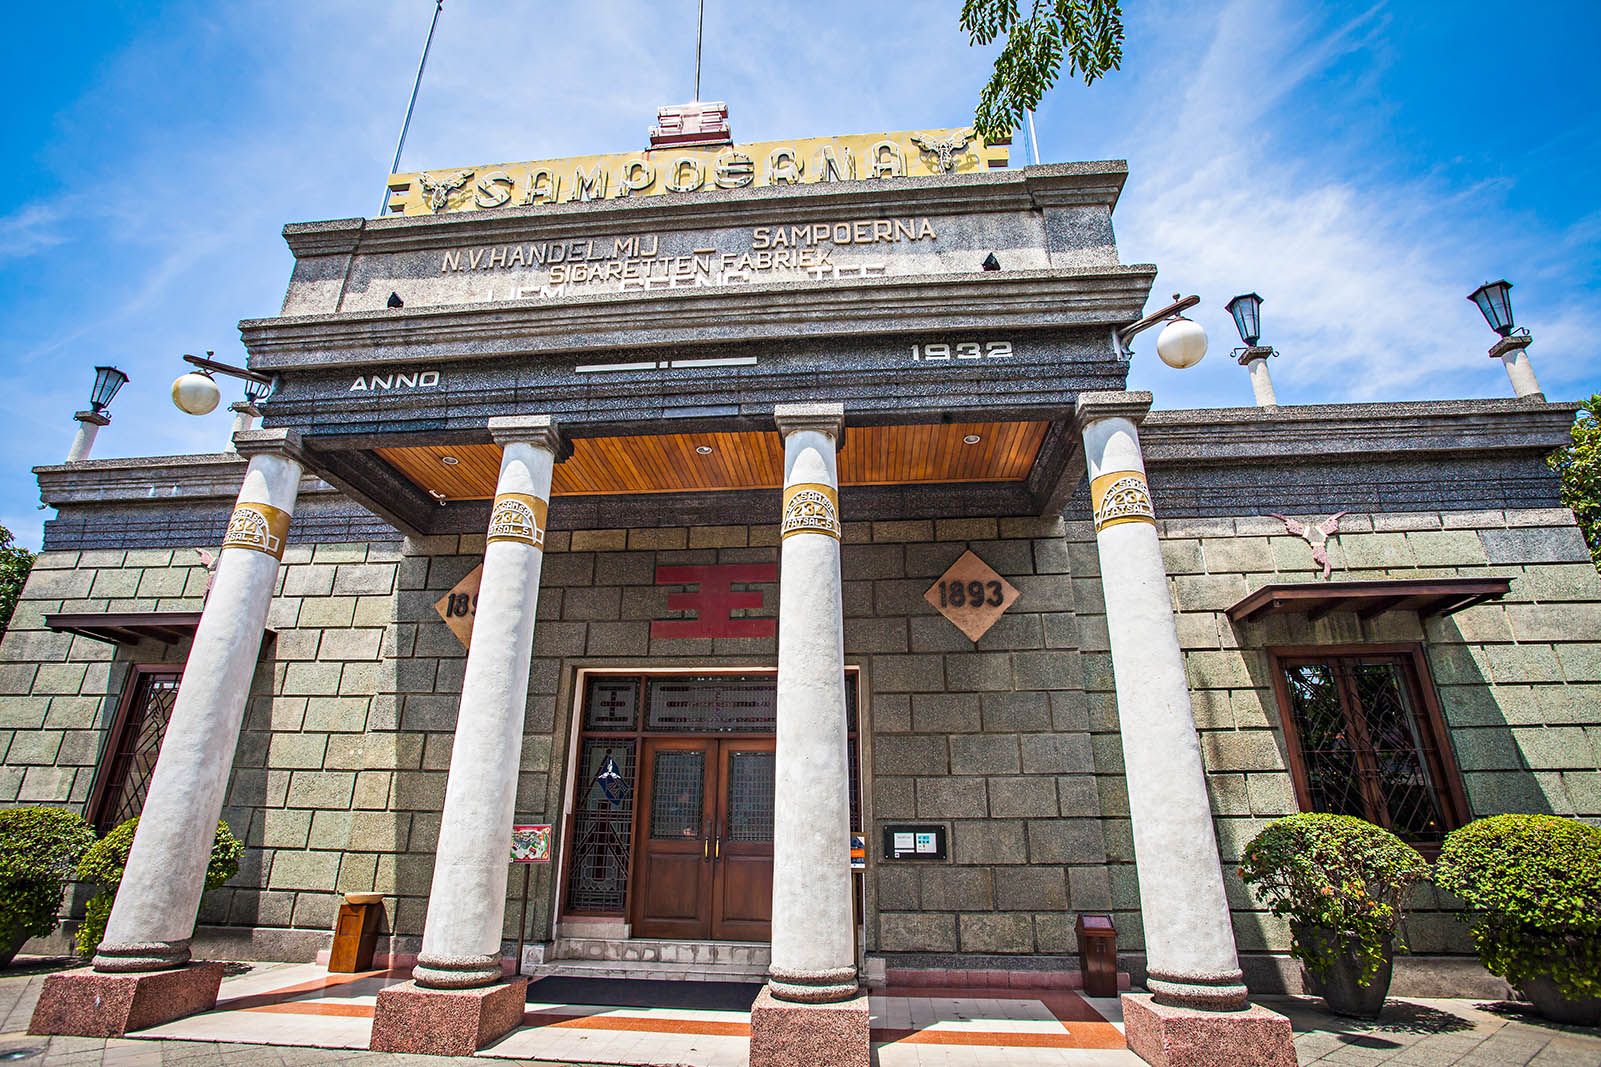 House of Sampoerna in Old Town